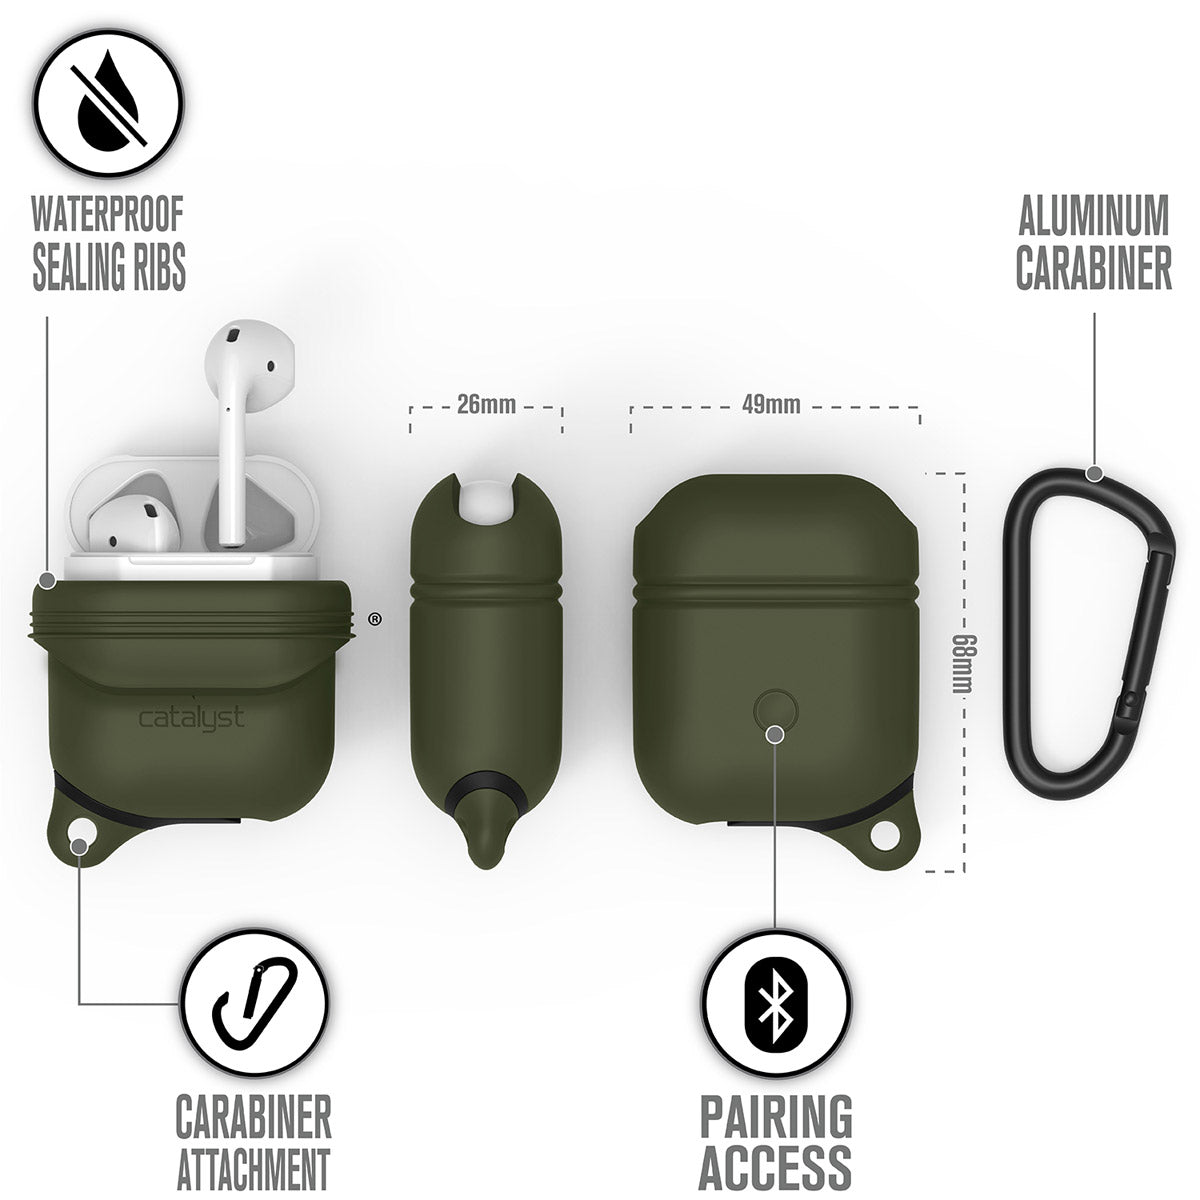 CATAPDGRN-FBA | Catalyst airpods gen2/1 waterproof case + carabiner showing the case dimension and features in army green text reads waterproof sealing ribs aluminum carabiner pairing access carabiner attachment